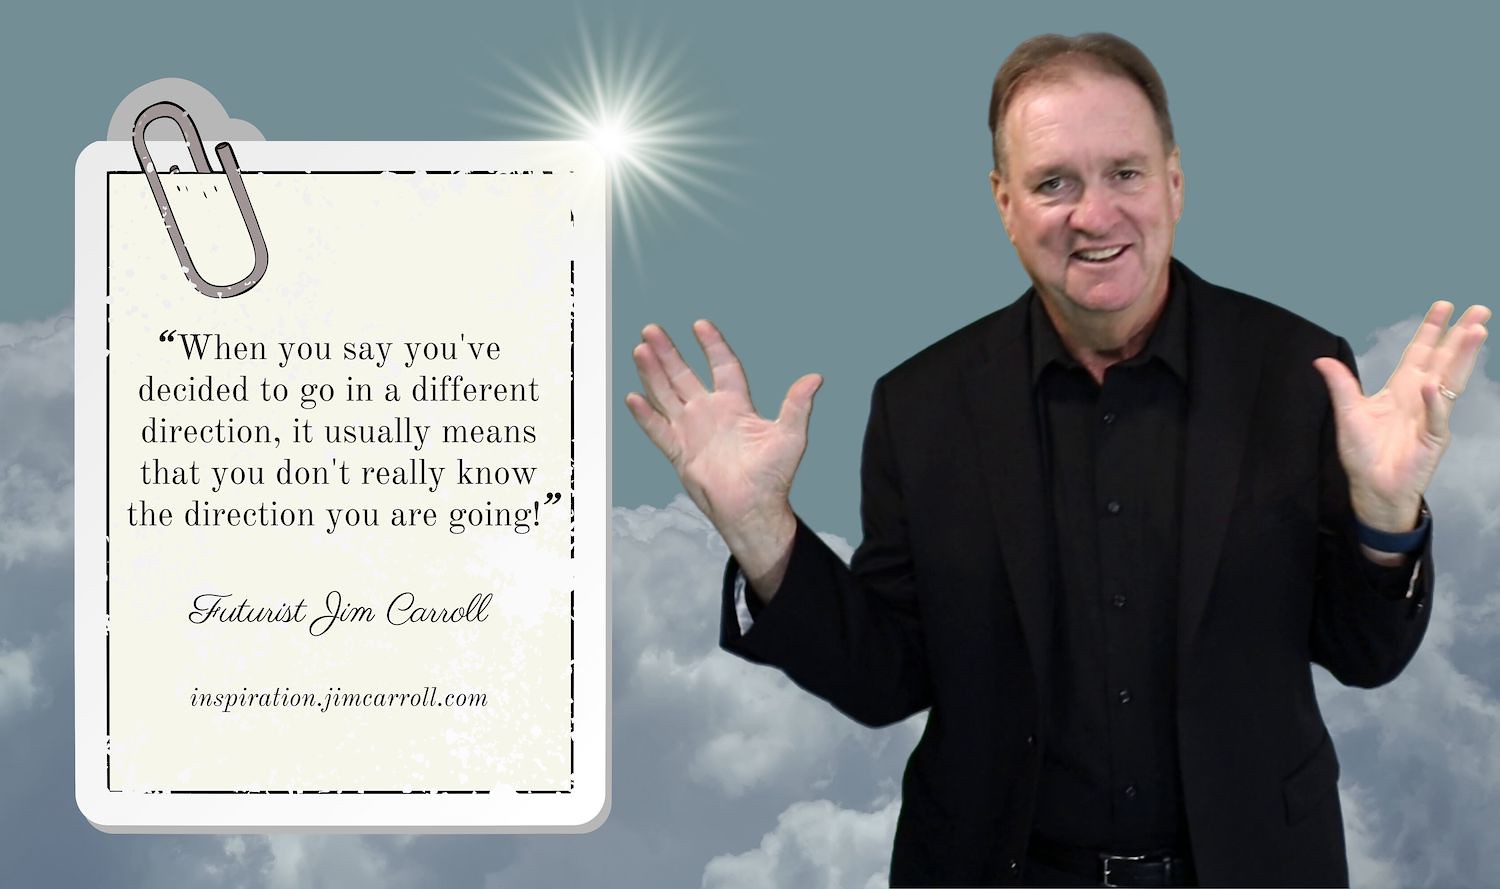 "When you say you've decided to go in a different direction, it usually means that you don't really know the direction you are going!" - Futurist Jim Carroll